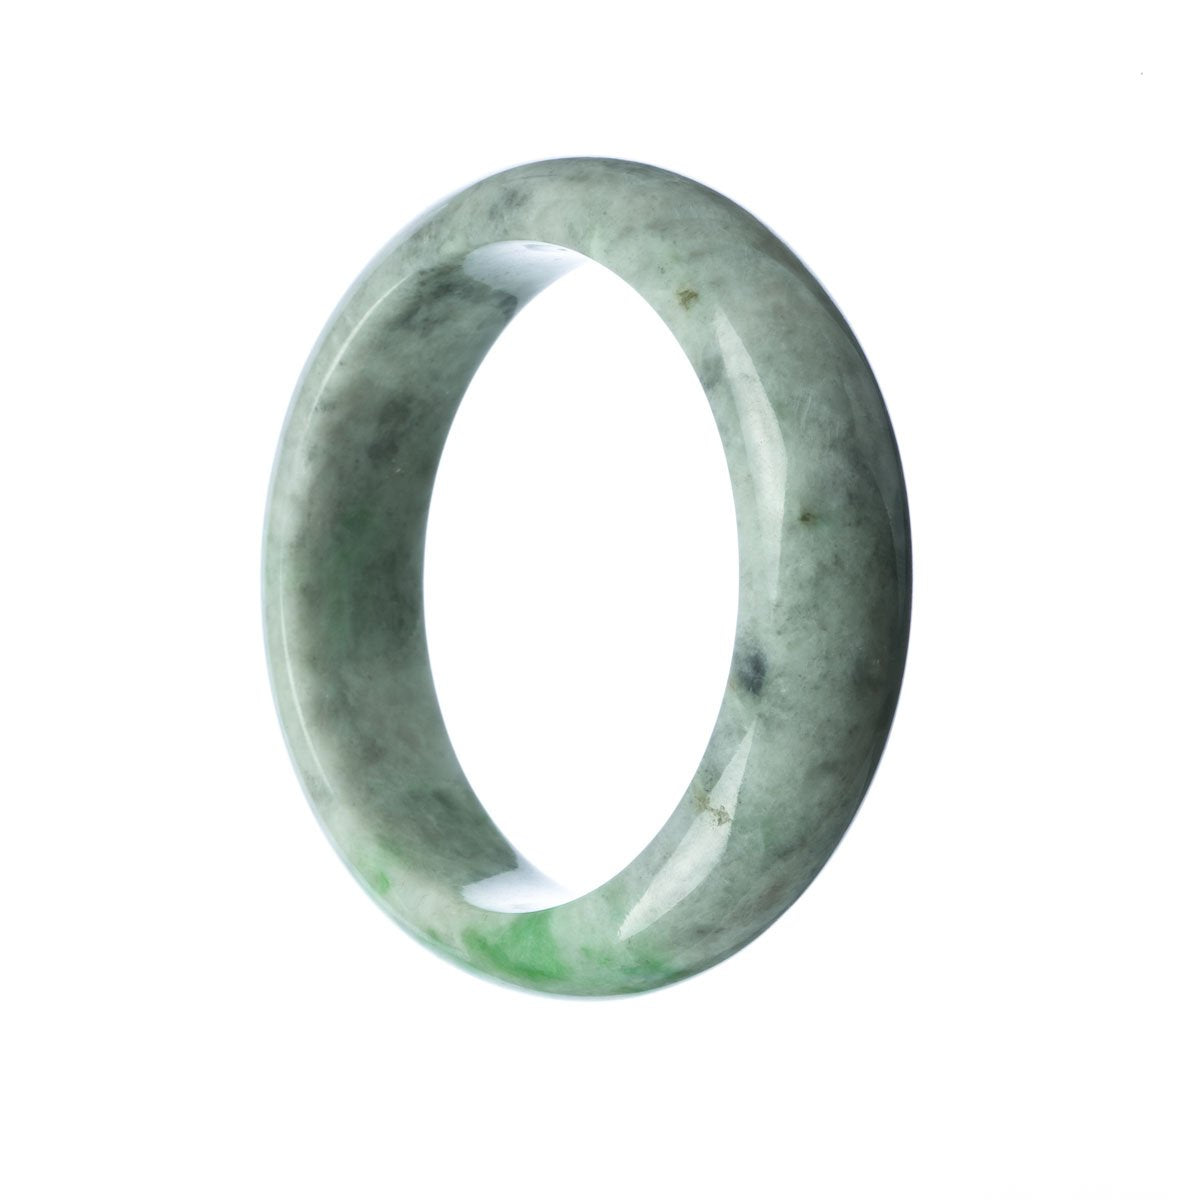 A half-moon shaped grey green jade bracelet with a traditional design, made from genuine Grade A jade. It measures 58mm in size and is sold by MAYS.